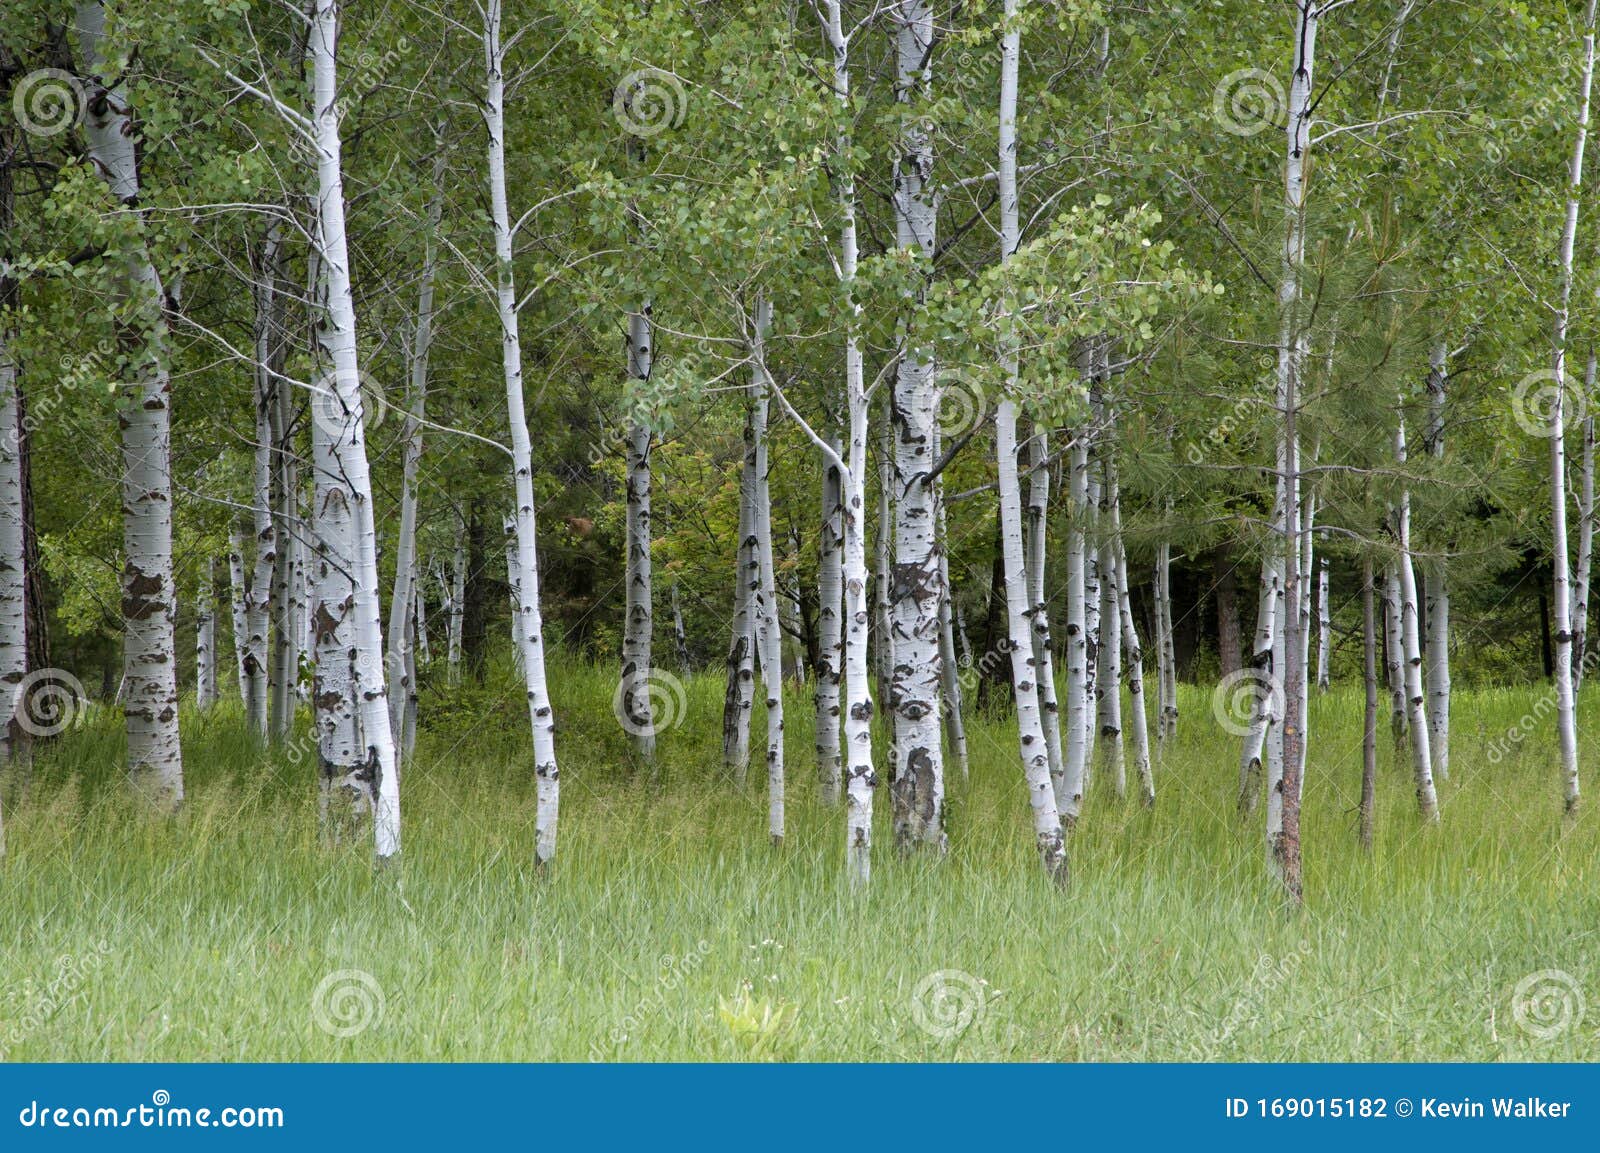 White Barked Quaking Aspen Trees Growing in a Group Stock Photo - Image